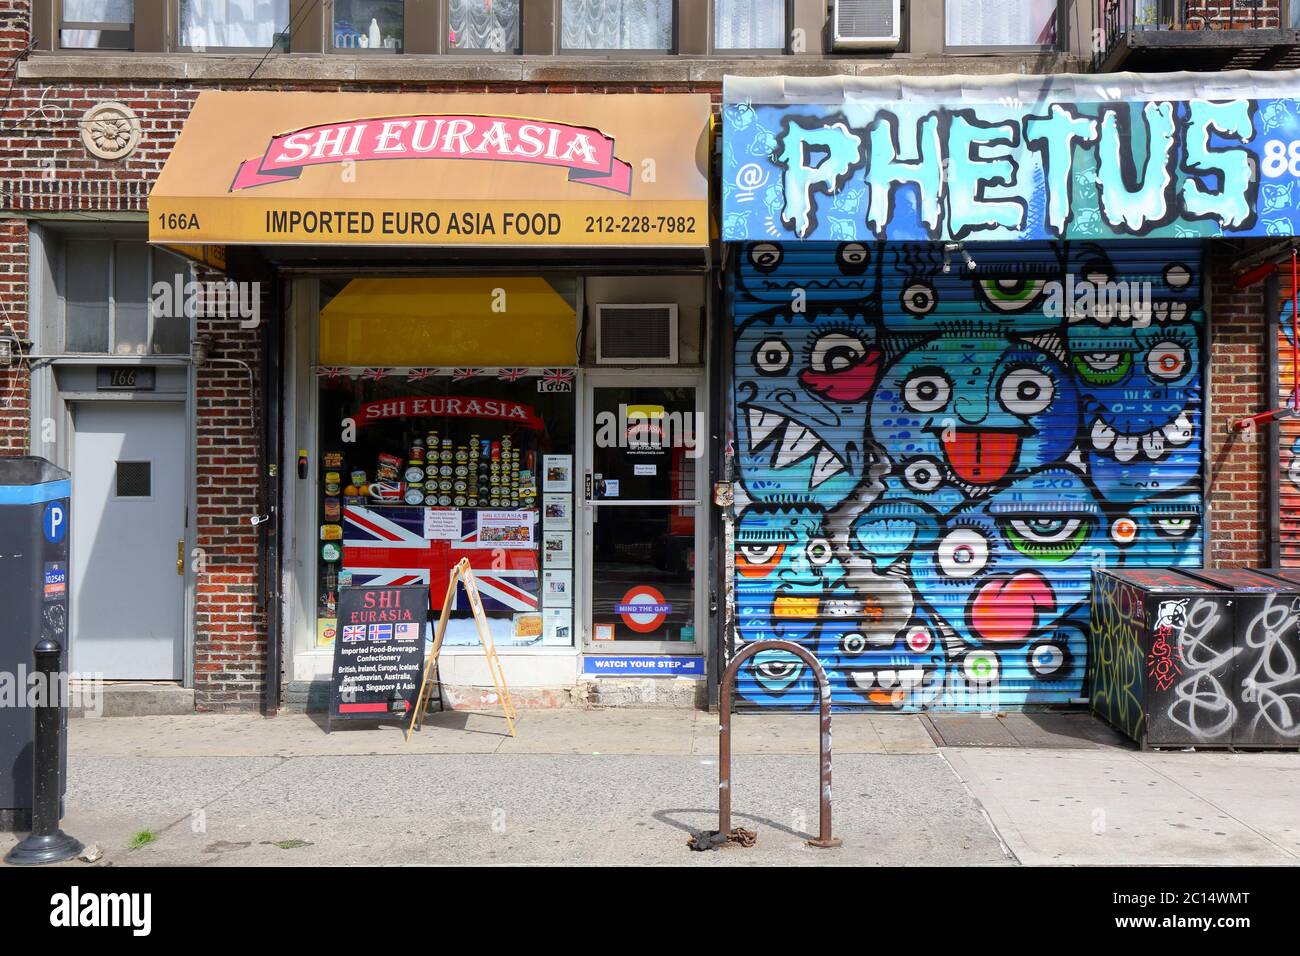 [historical storefront] Shi Eurasia, 166A Allen St, New York, NYC storefront photo of an imported British food store in Manhattan's Lower East Side. Stock Photo